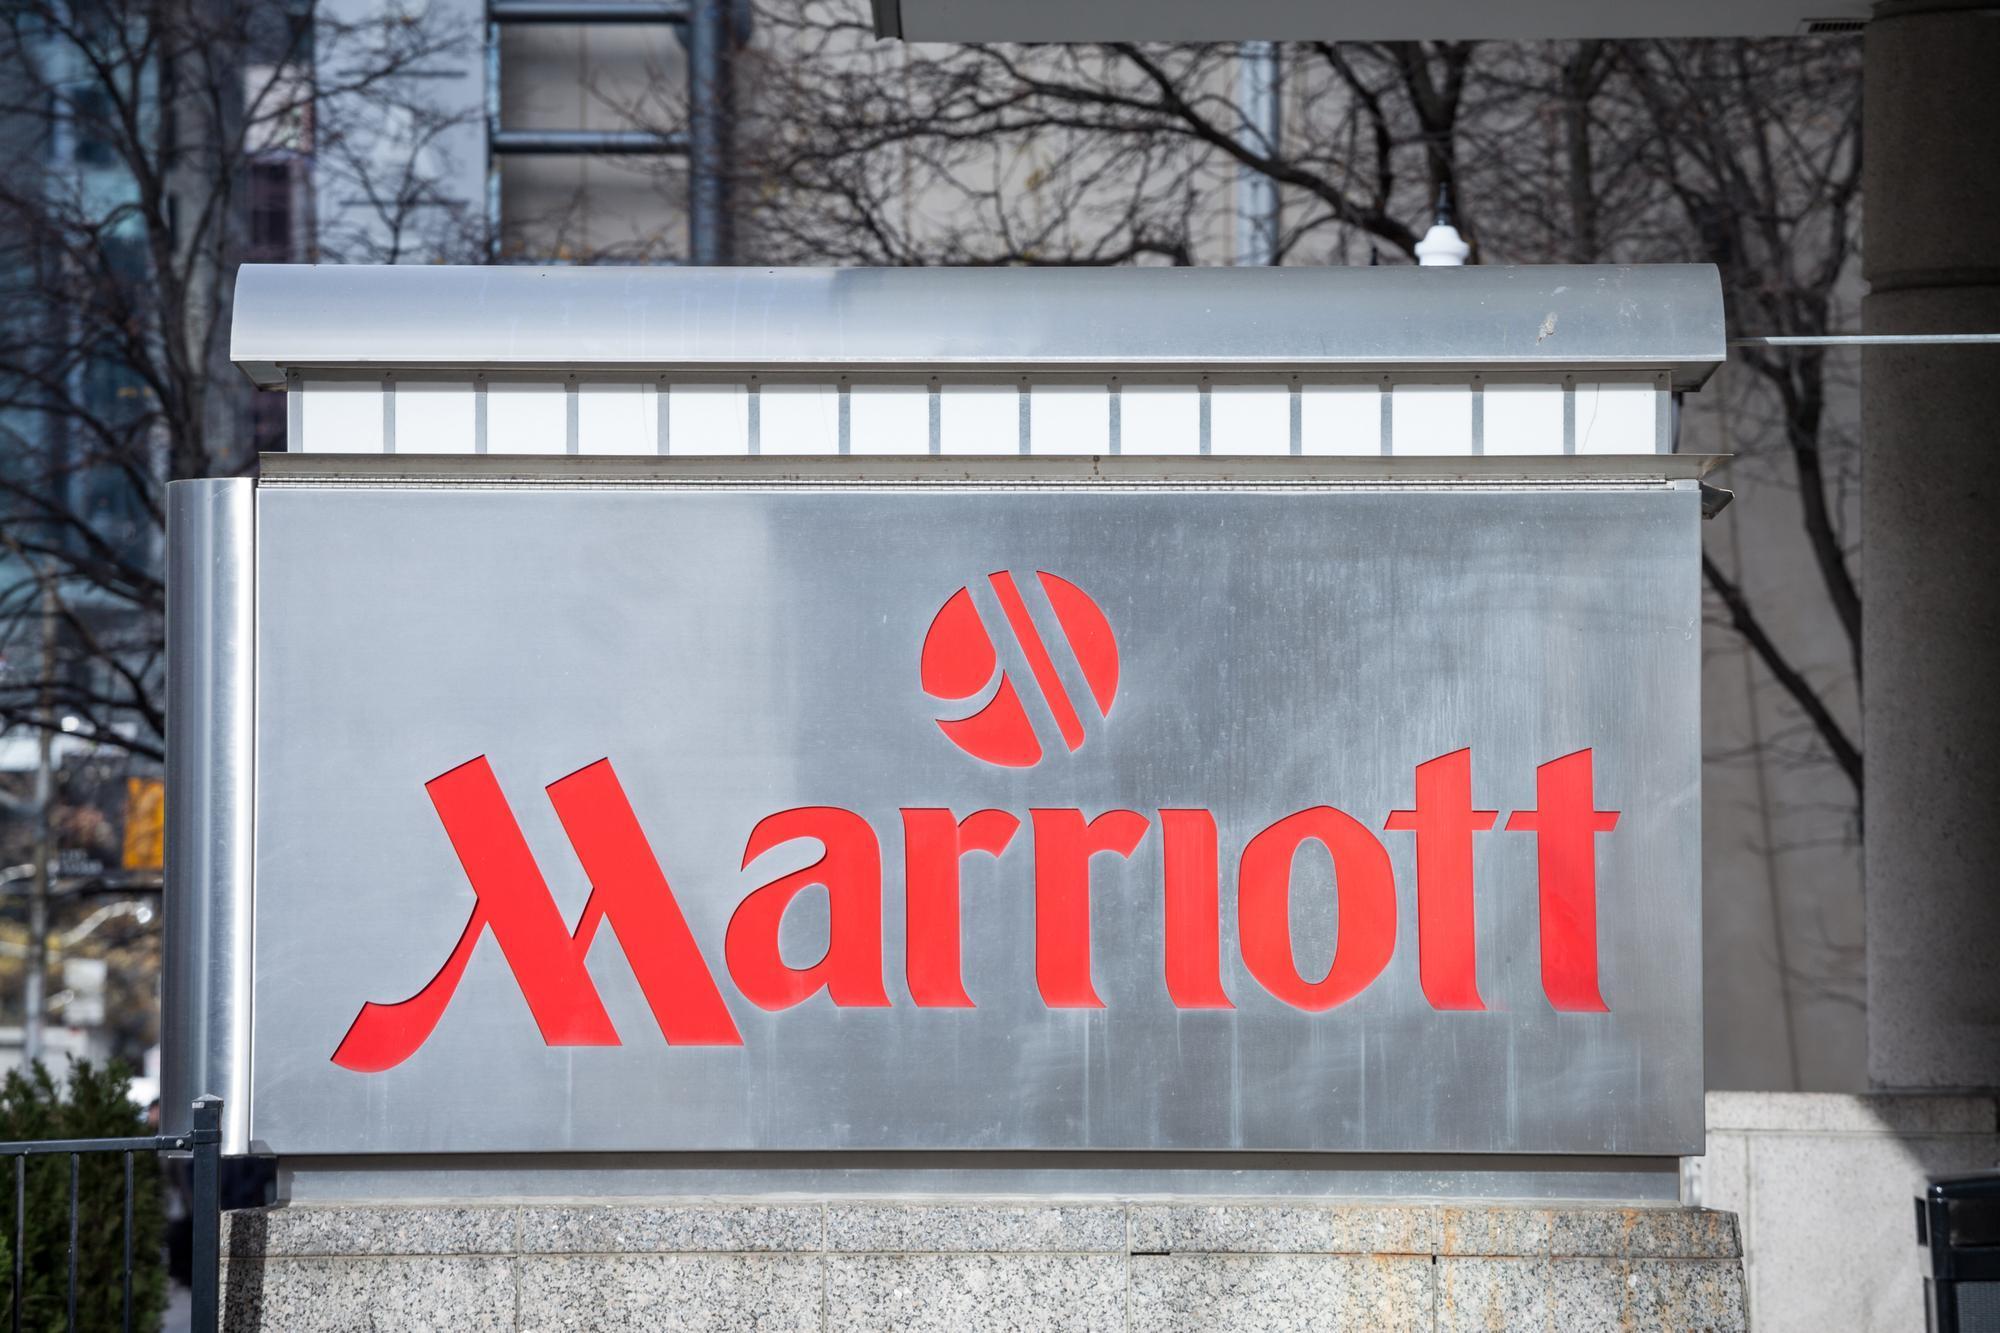 WHY CAN’T OTHER TIMESHARE COMPANIES BE AS HONOURABLE AS MARRIOTT?